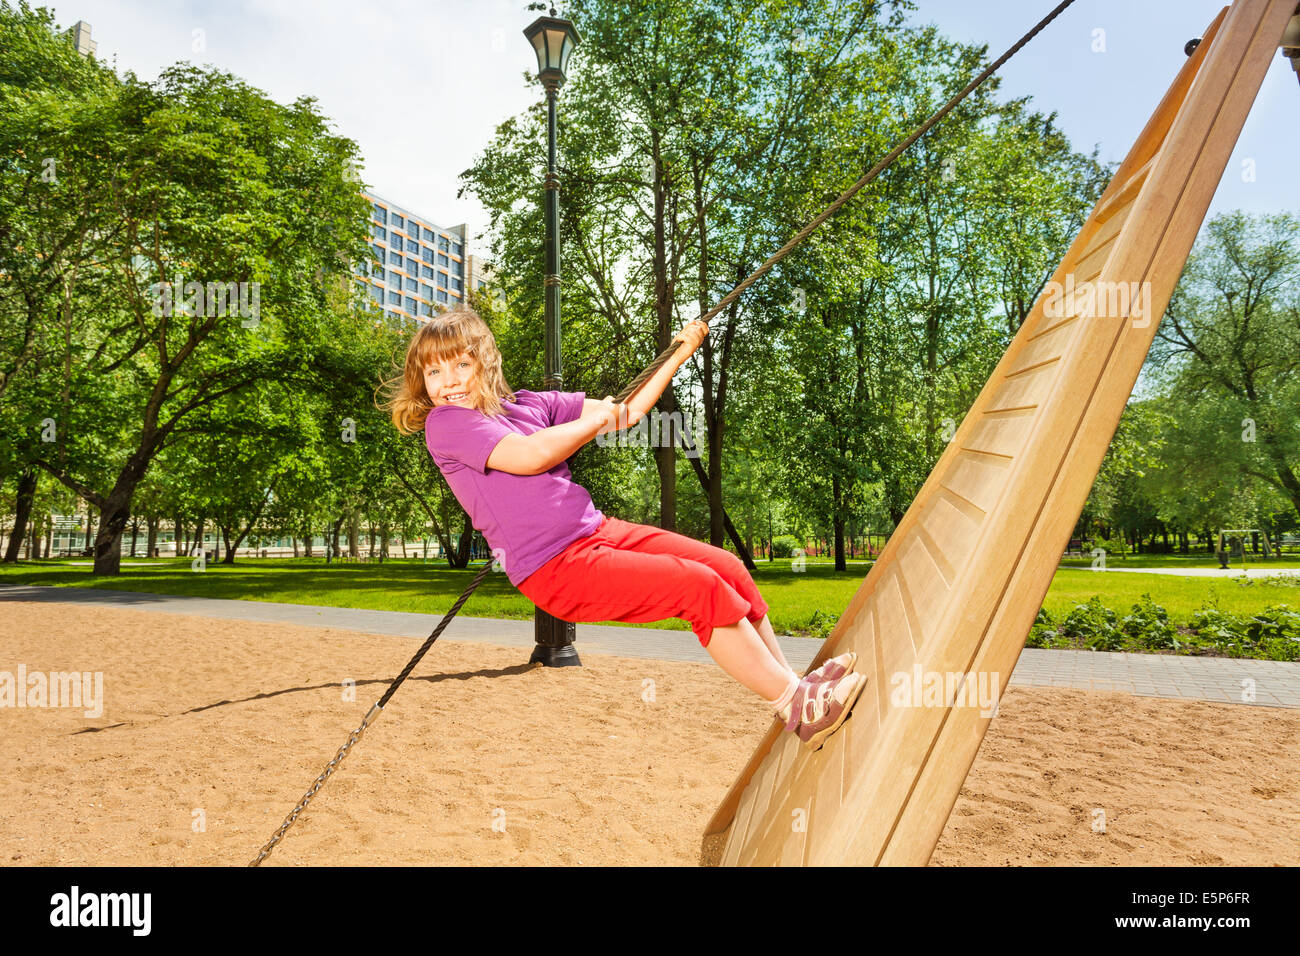 Girl climbing on wooden construction in the park Stock Photo